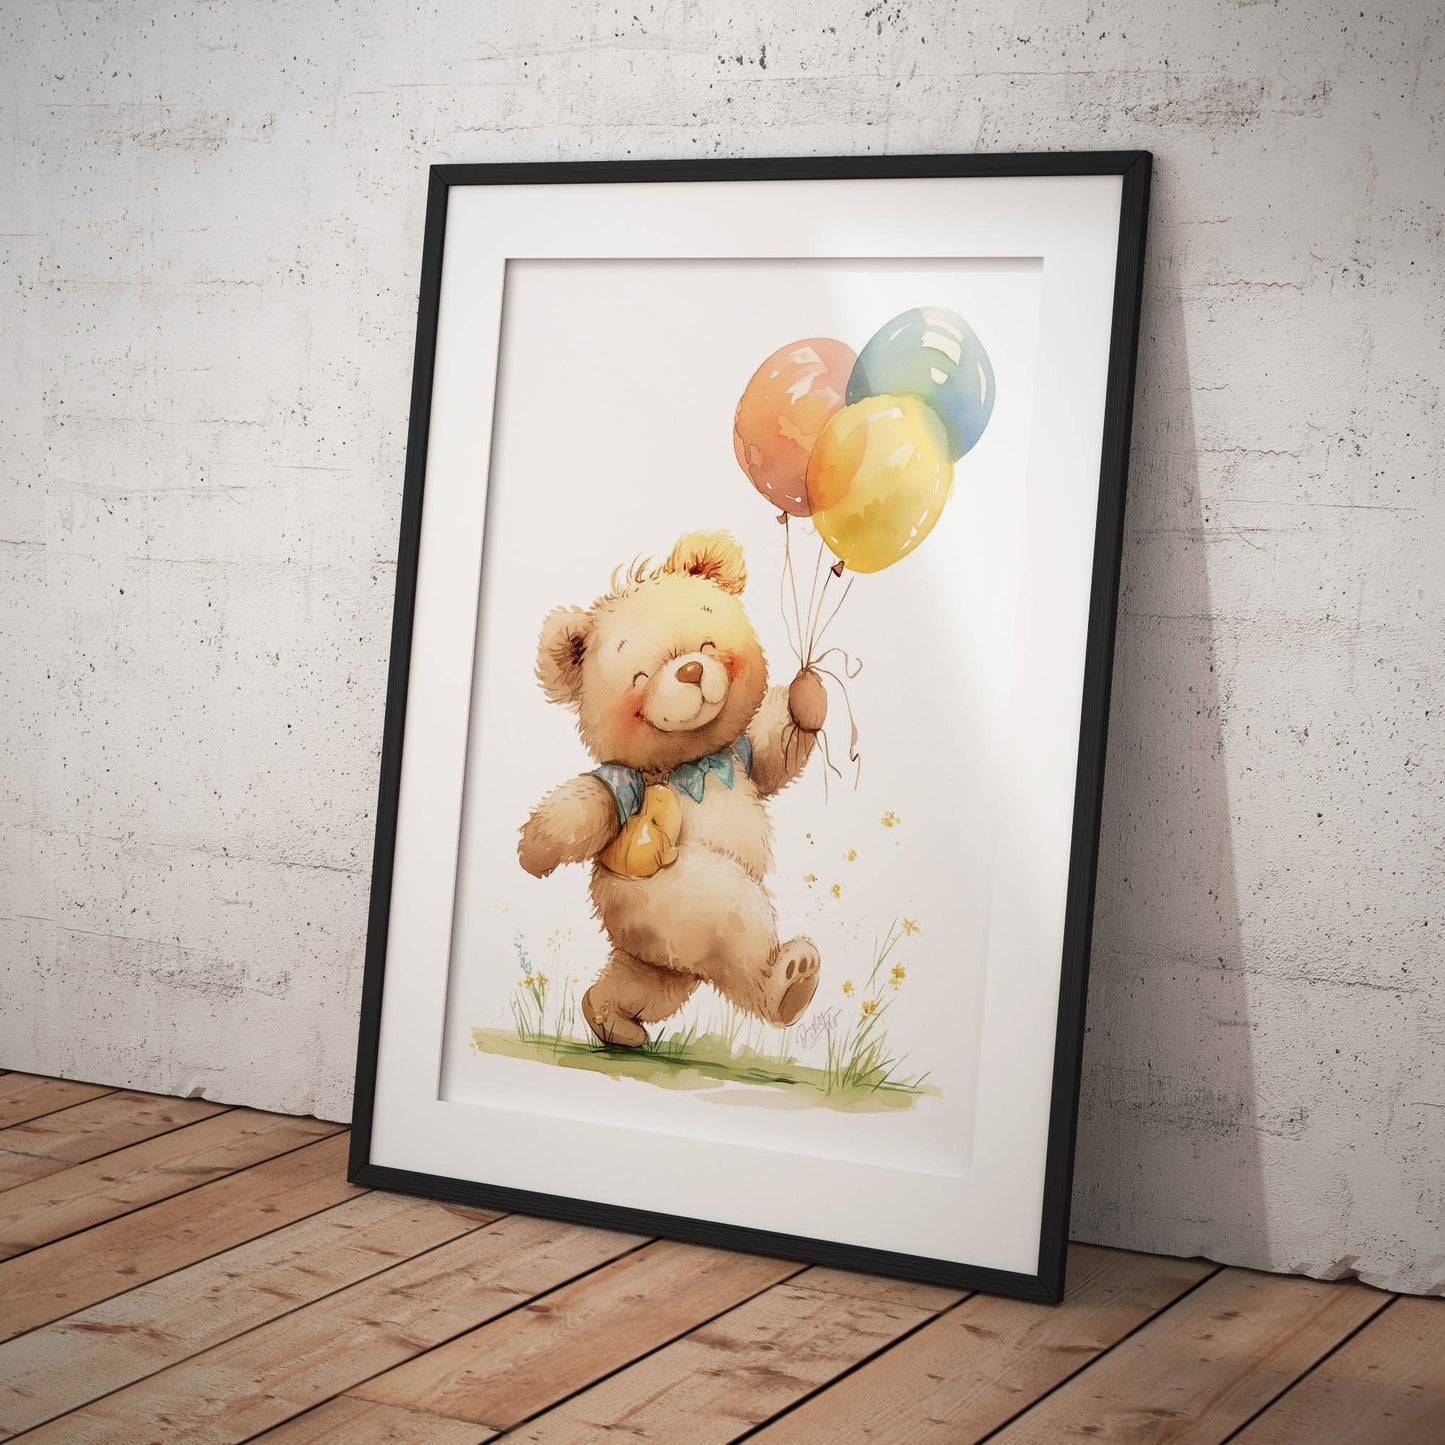 »Teddy And Balloons« barnposter